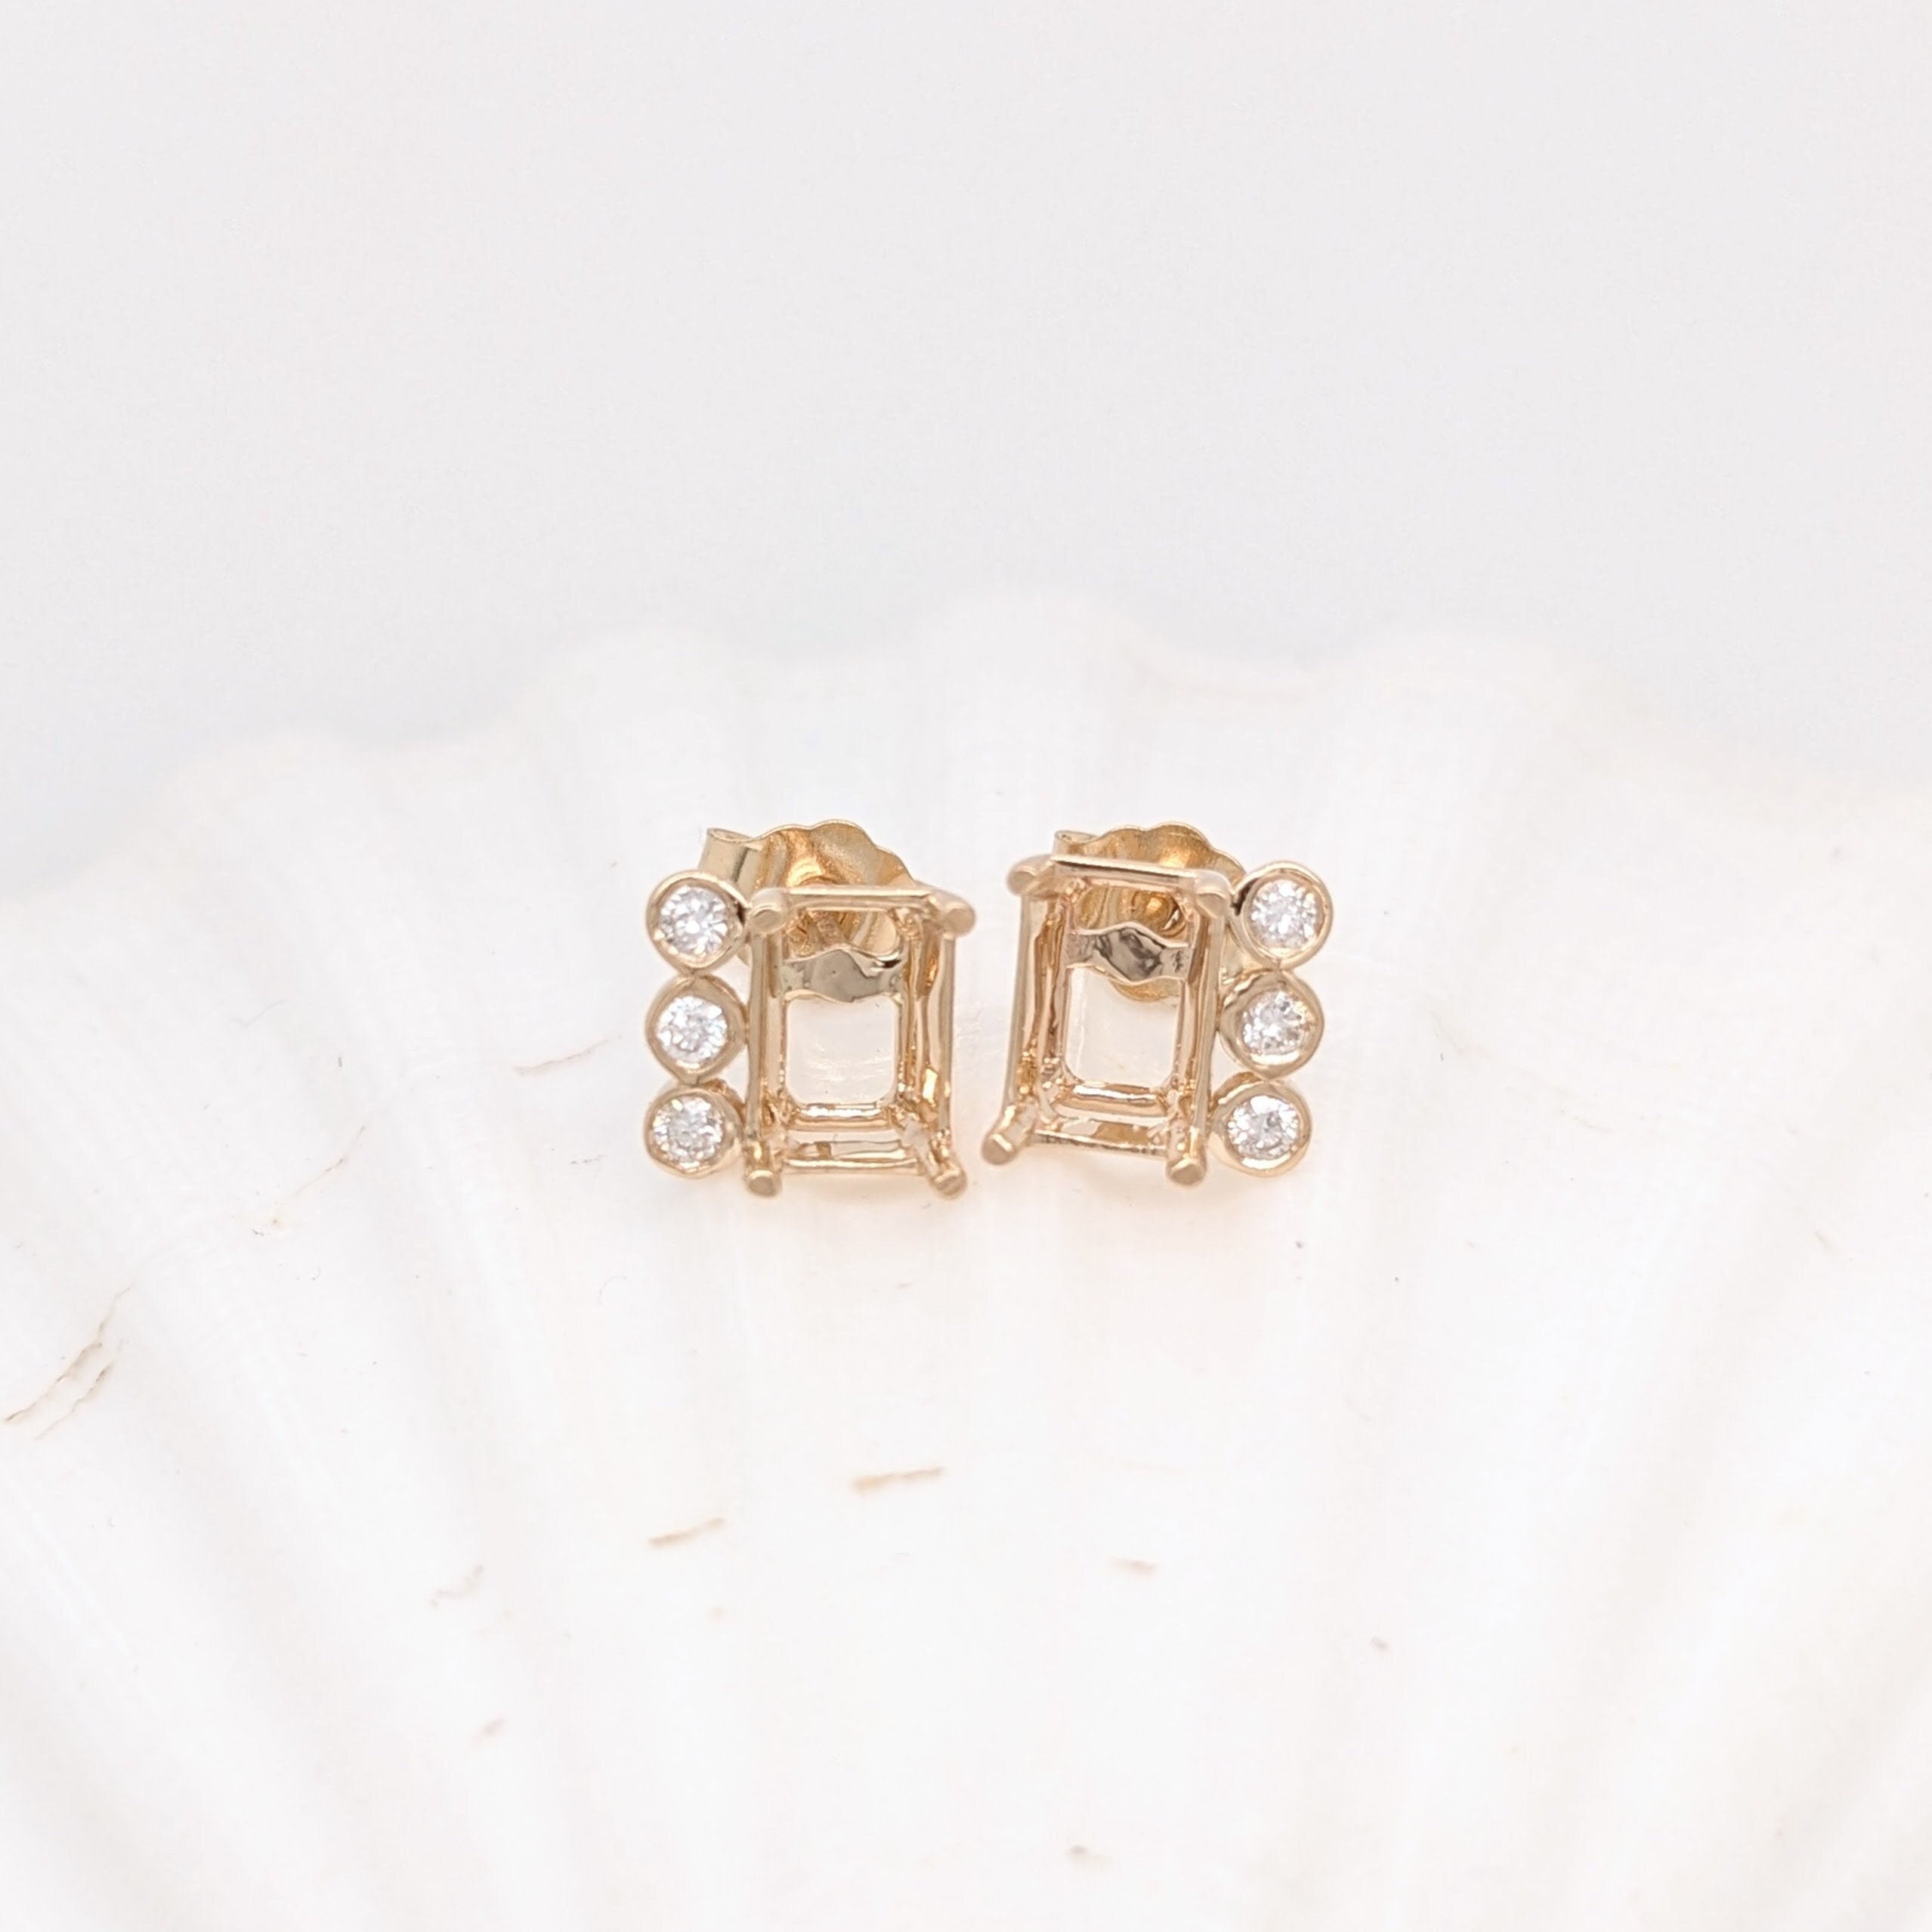 Stud Earrings-Minimal Daily Wear Earring Stud Semi Mount in Solid 14K White, Yellow or Rose Gold w Natural Diamond Accents | Emerald Cut 6x4mm | Push Back - NNJGemstones